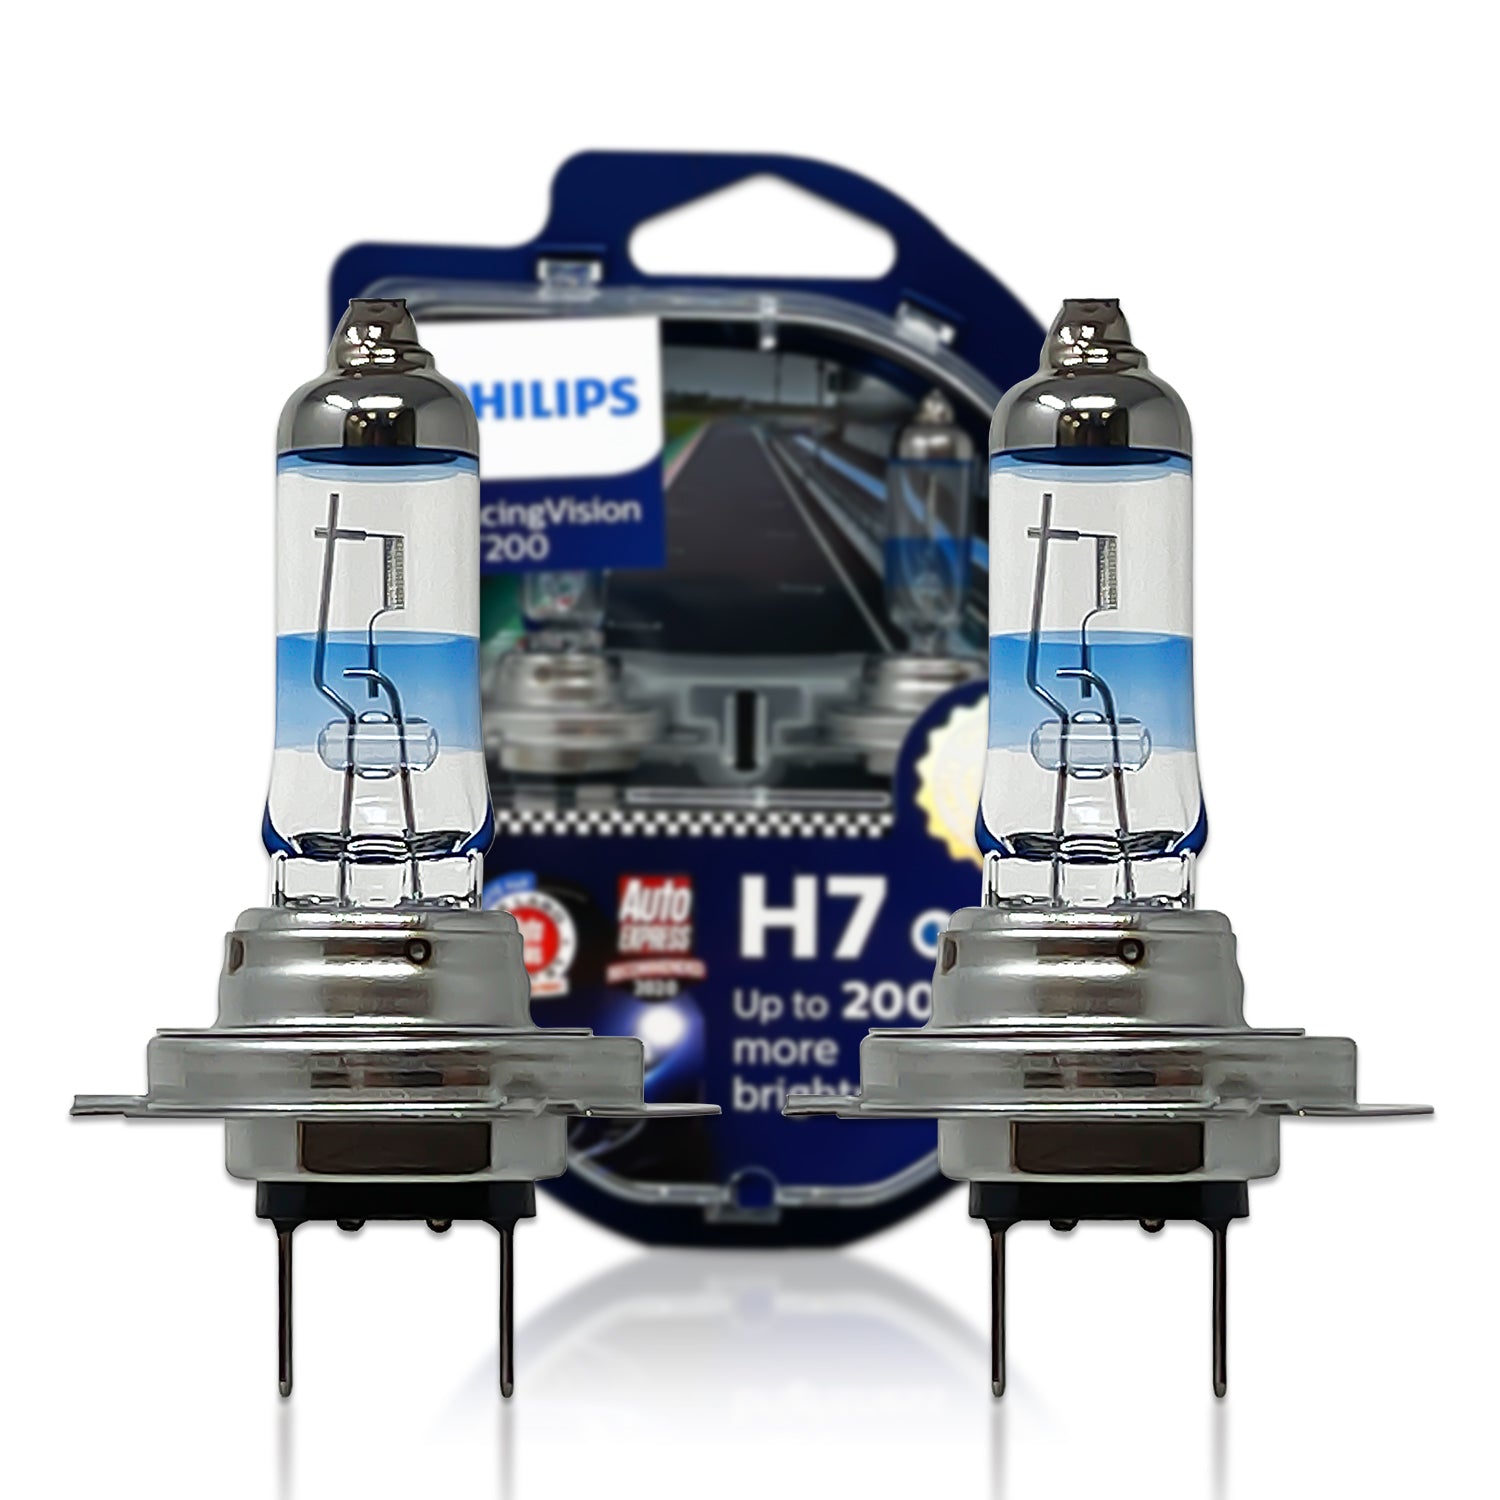 Philips RacingVision GT200 H7 (Twin)